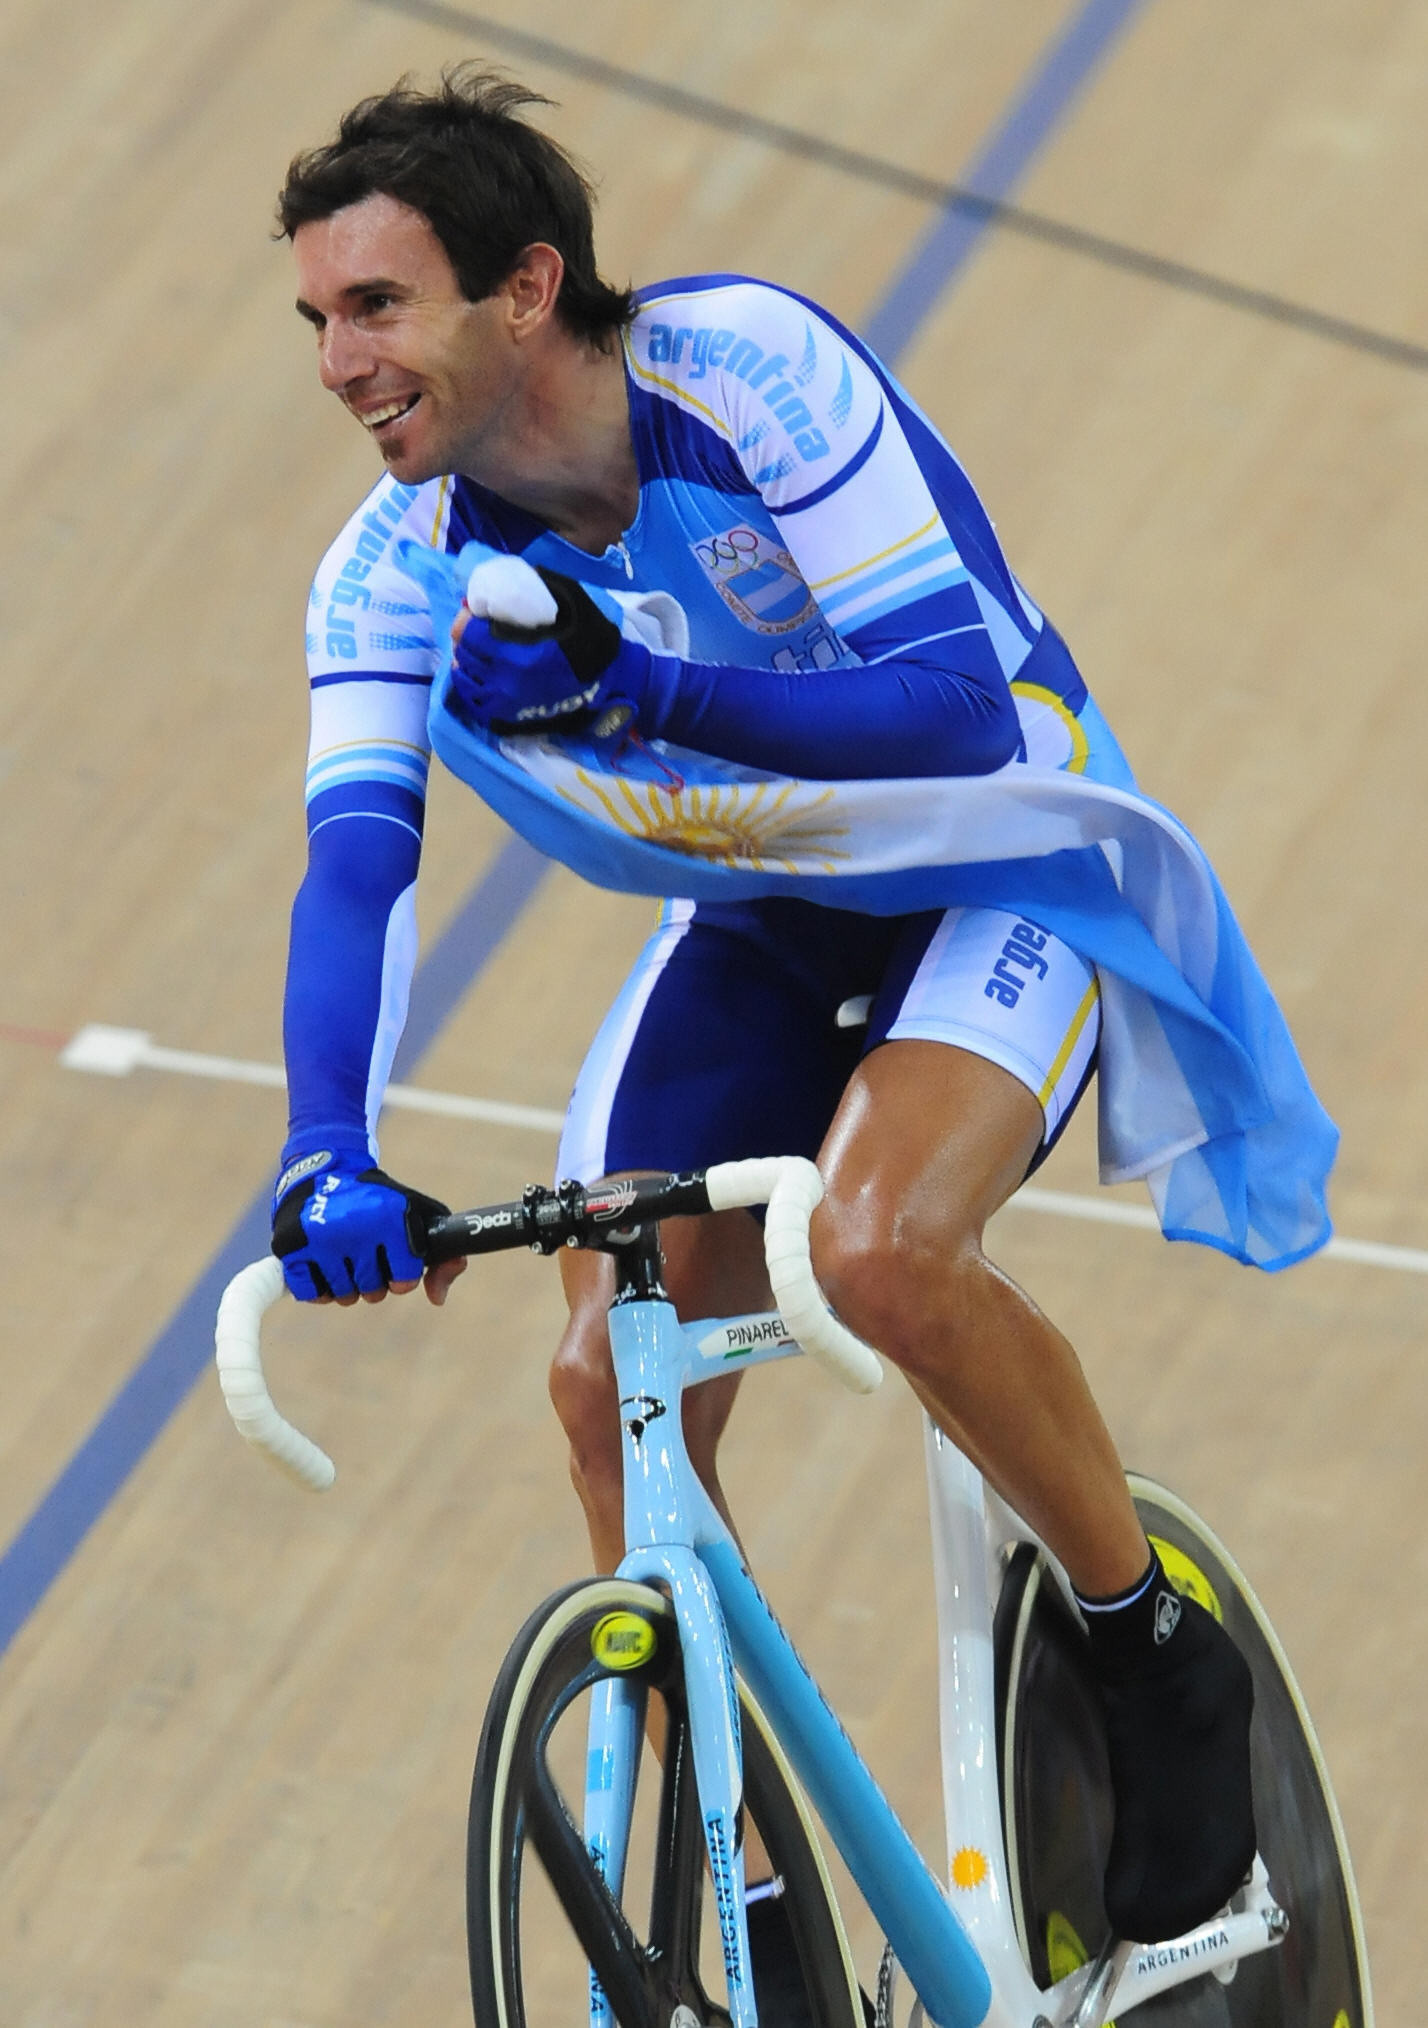 Beijing 2008 madison champion Walter Pérez of Argentina is running to be elected to the Panam Sports Athlete Commission ©Getty Images